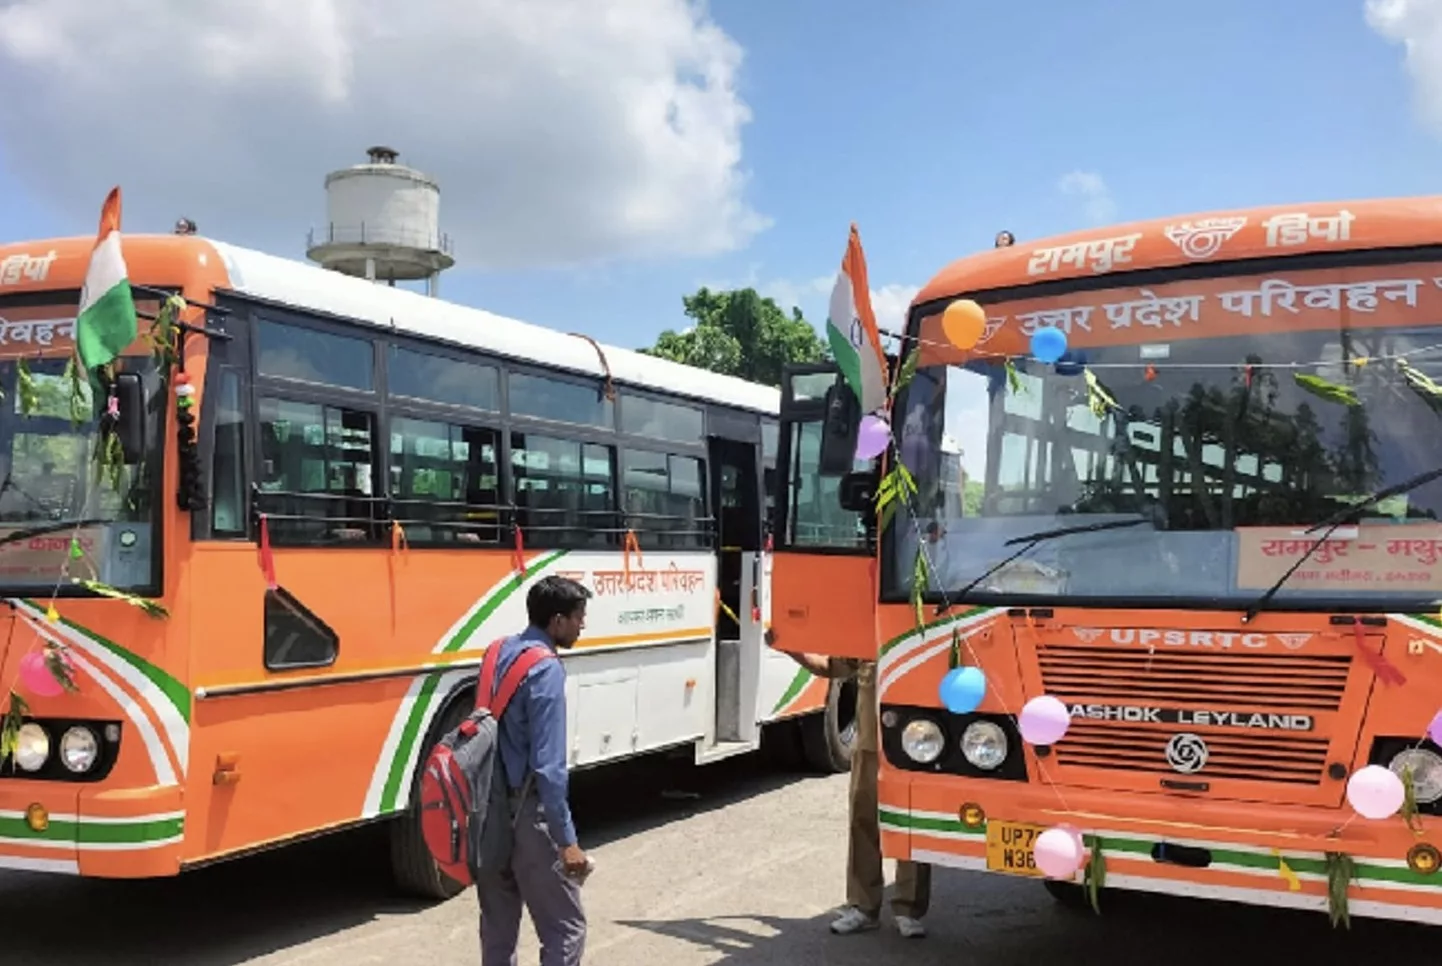 New buses for upsrtc